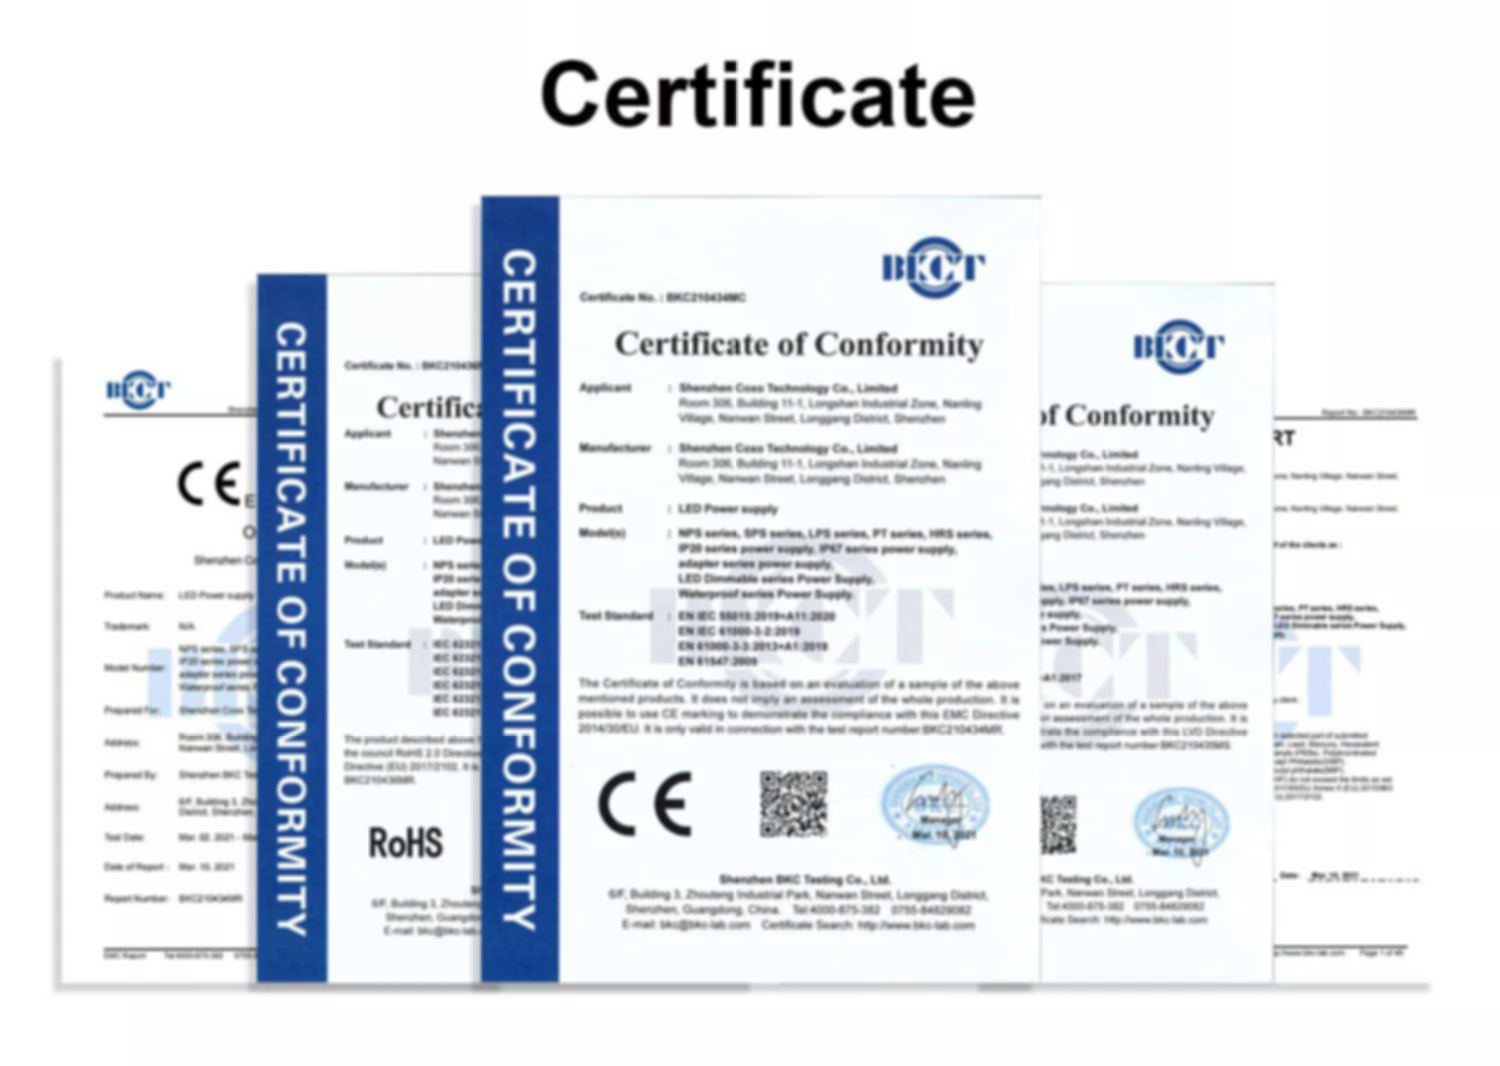 Show switch power supply Compliant Certificate